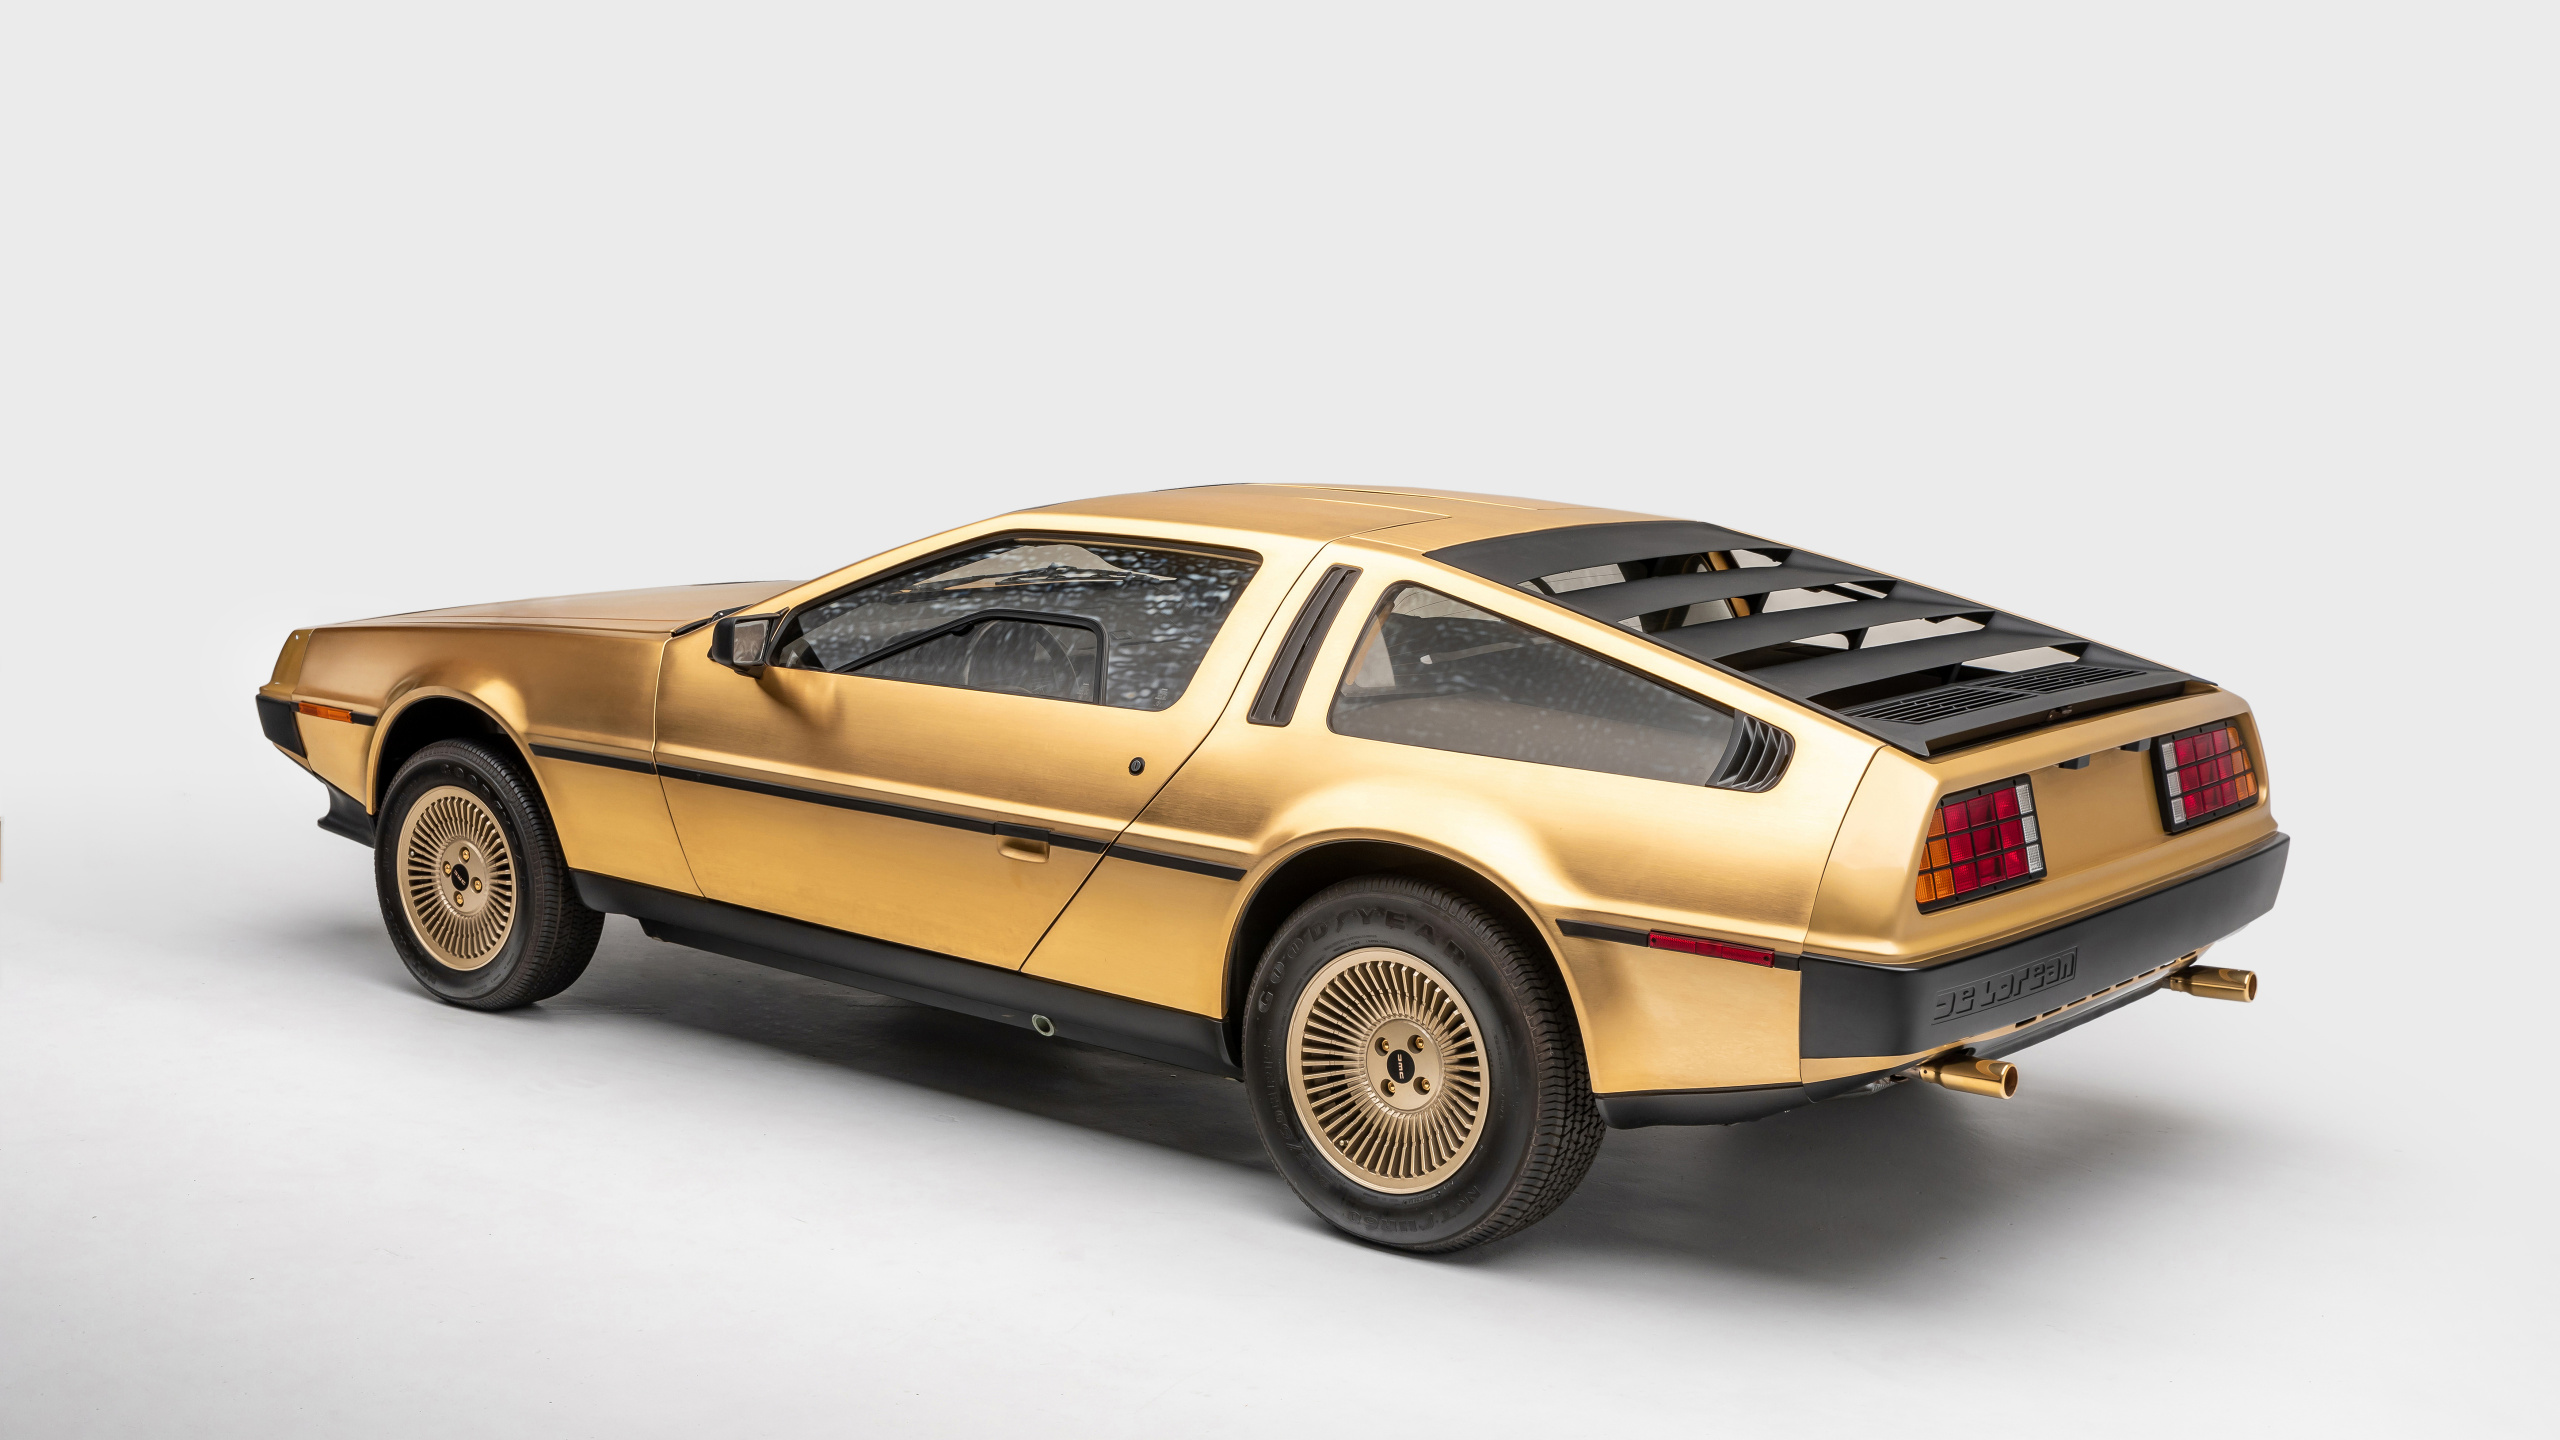 Delorean Dmc 12, DMC DeLorean, DeLorean, DeLorean Motor Company, Roue. Wallpaper in 2560x1440 Resolution